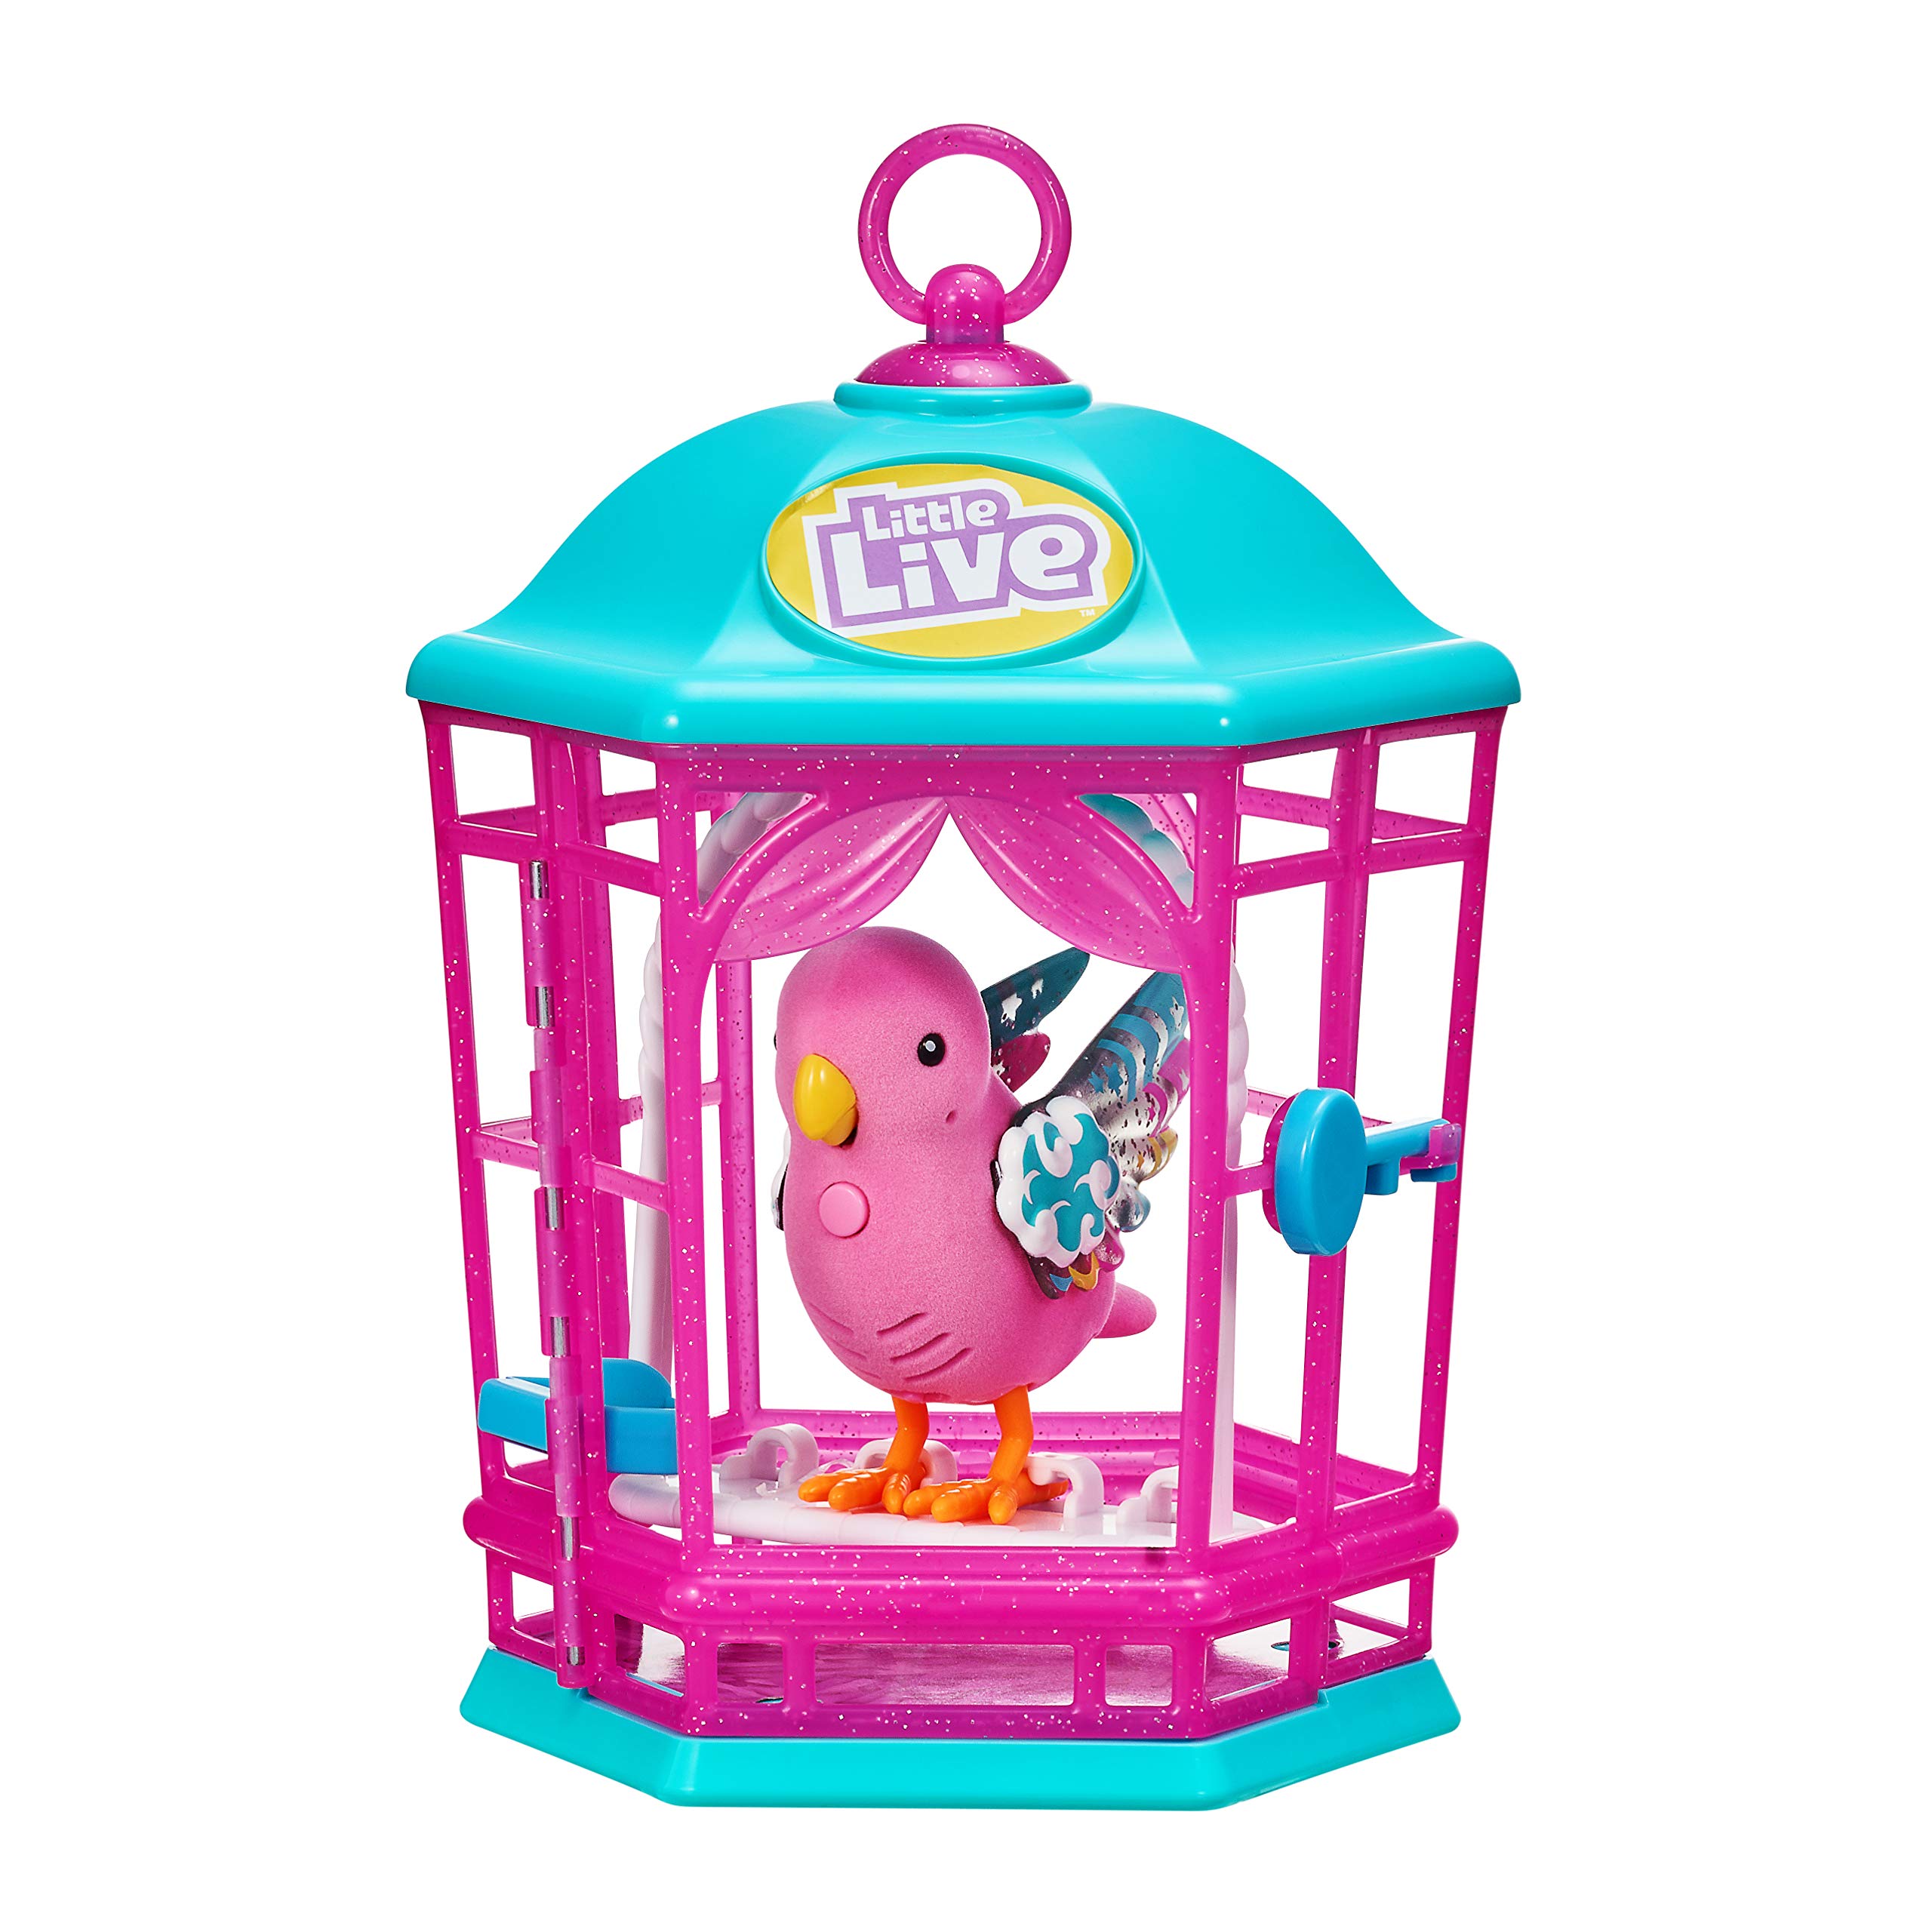 Little Live Pets Bird with Cage - Rainbow Glow - Styles May Vary